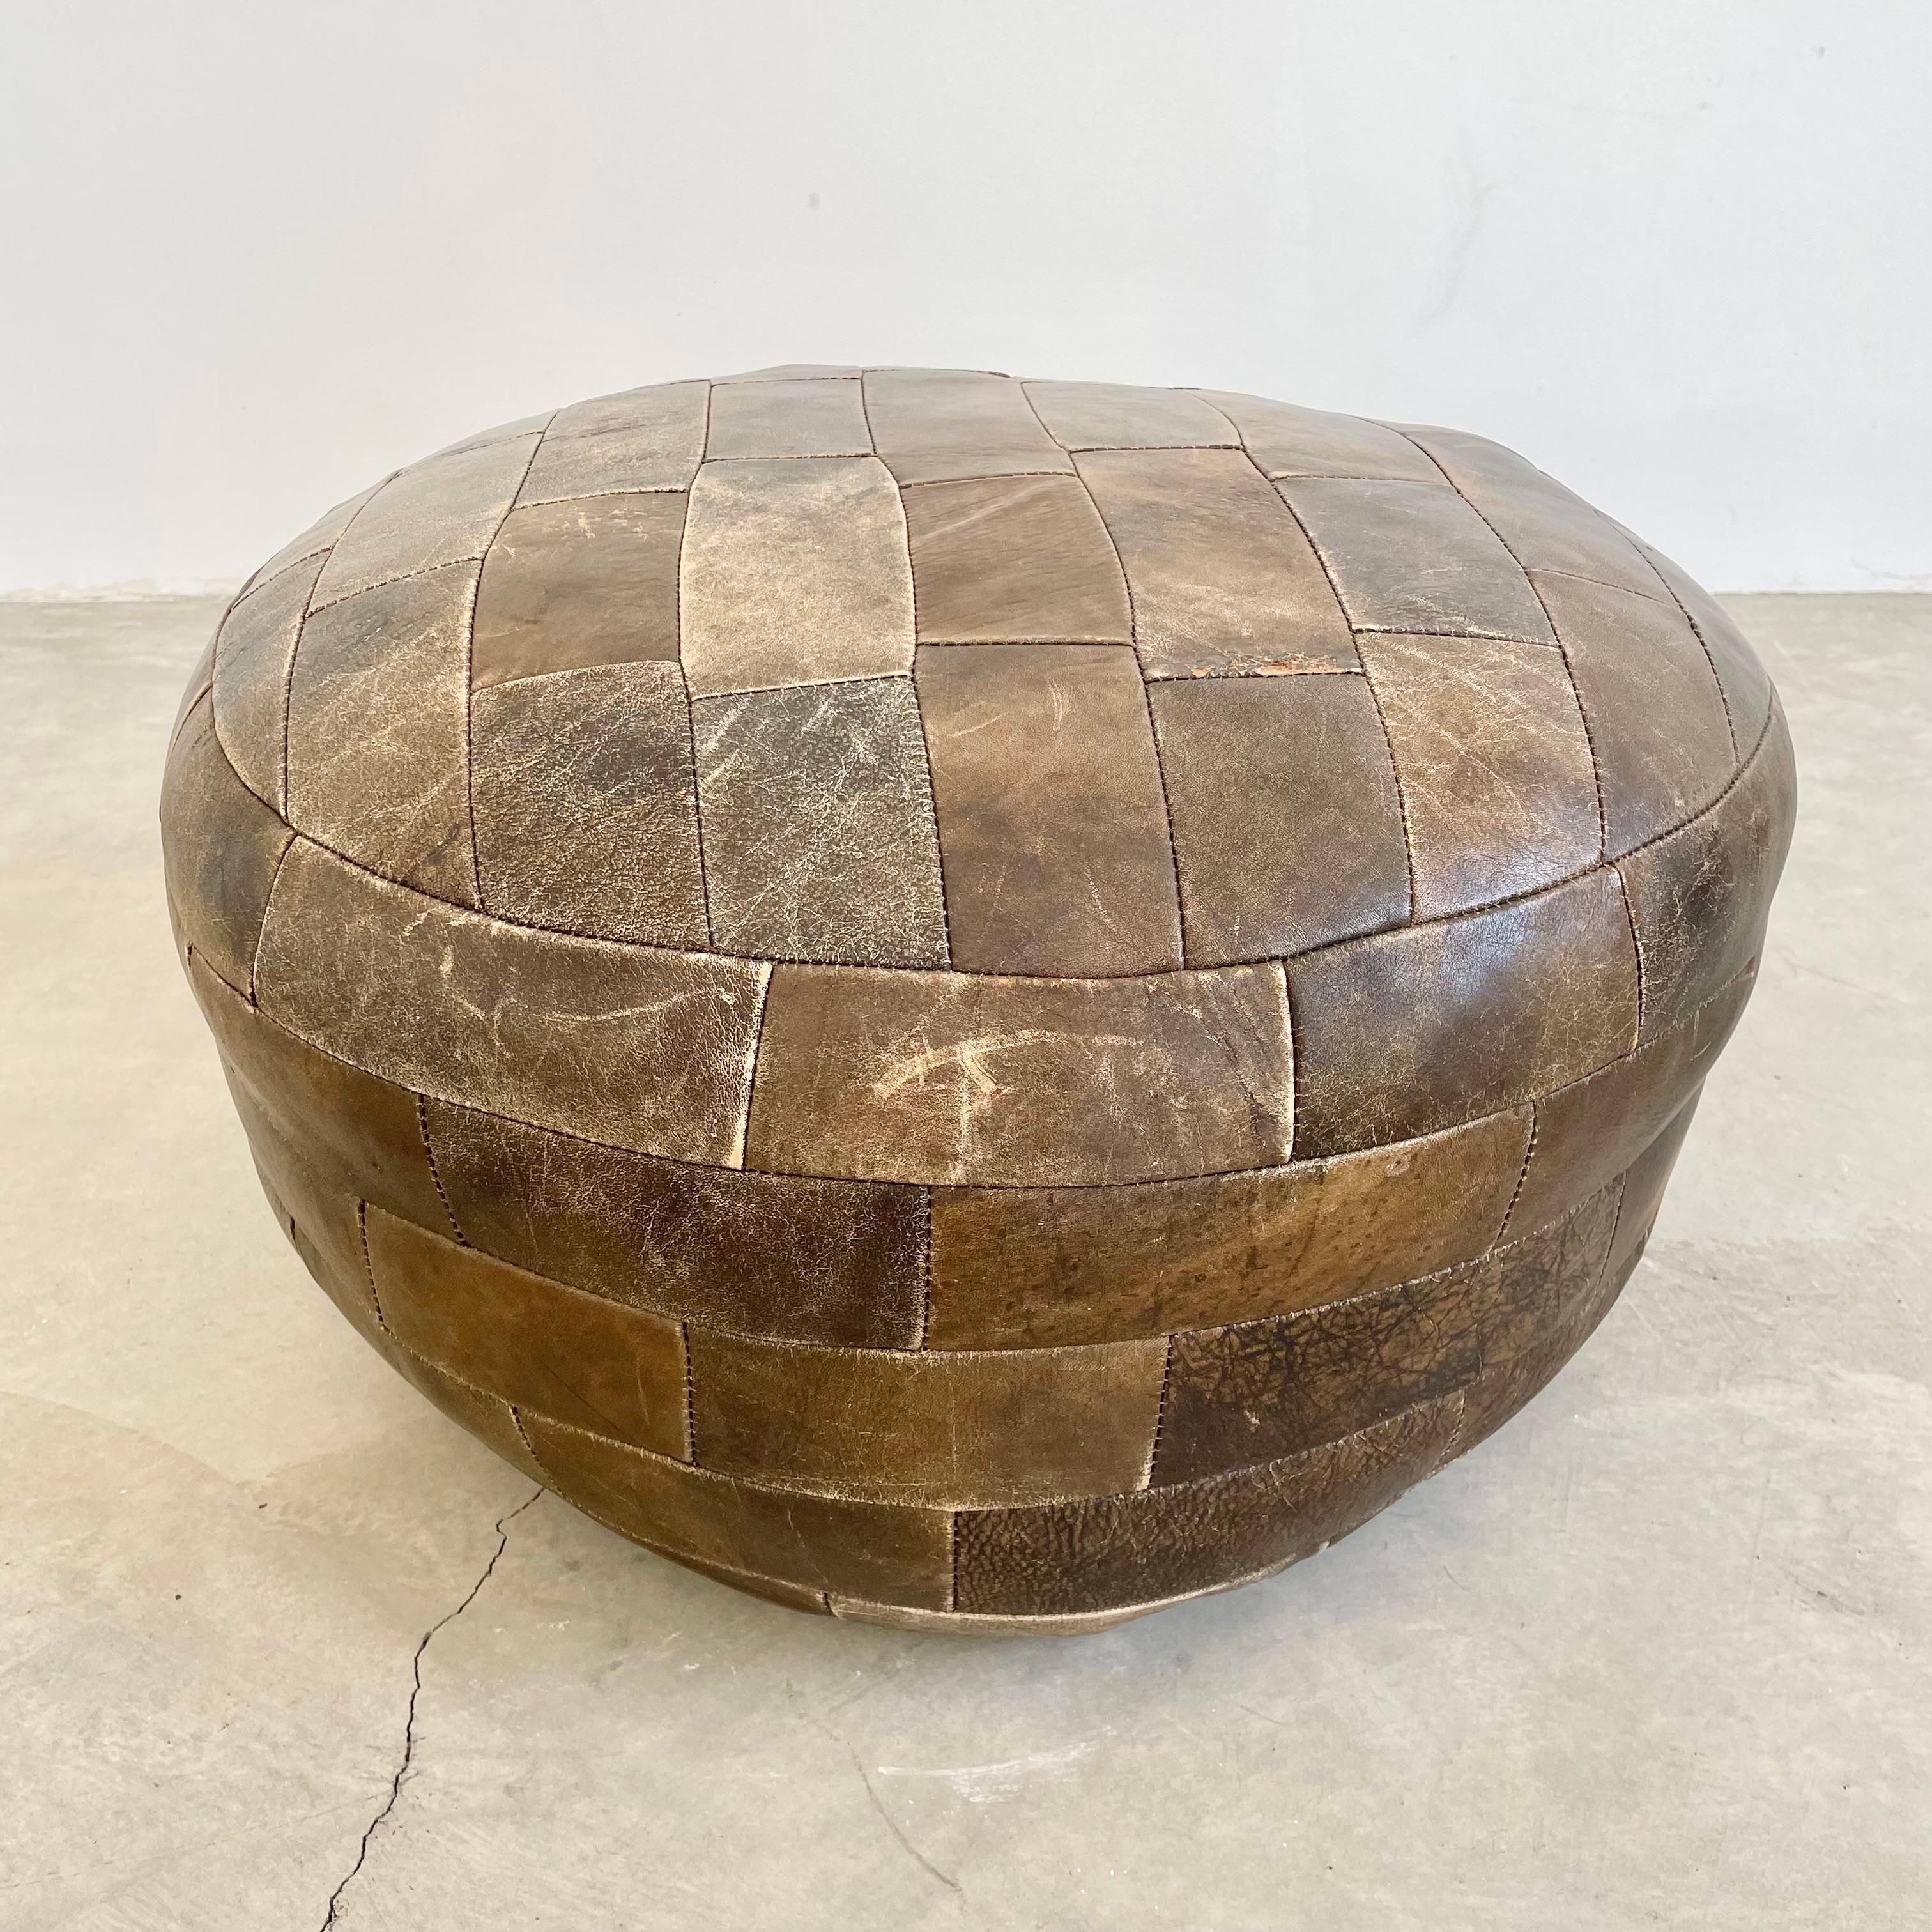 Gorgeous brown leather pouf by Swiss designer De Sede. Square patchwork design. Great vintage condition with perfect patina. Perfect accent piece.

Other poufs available in different colors and designs in separate listings.